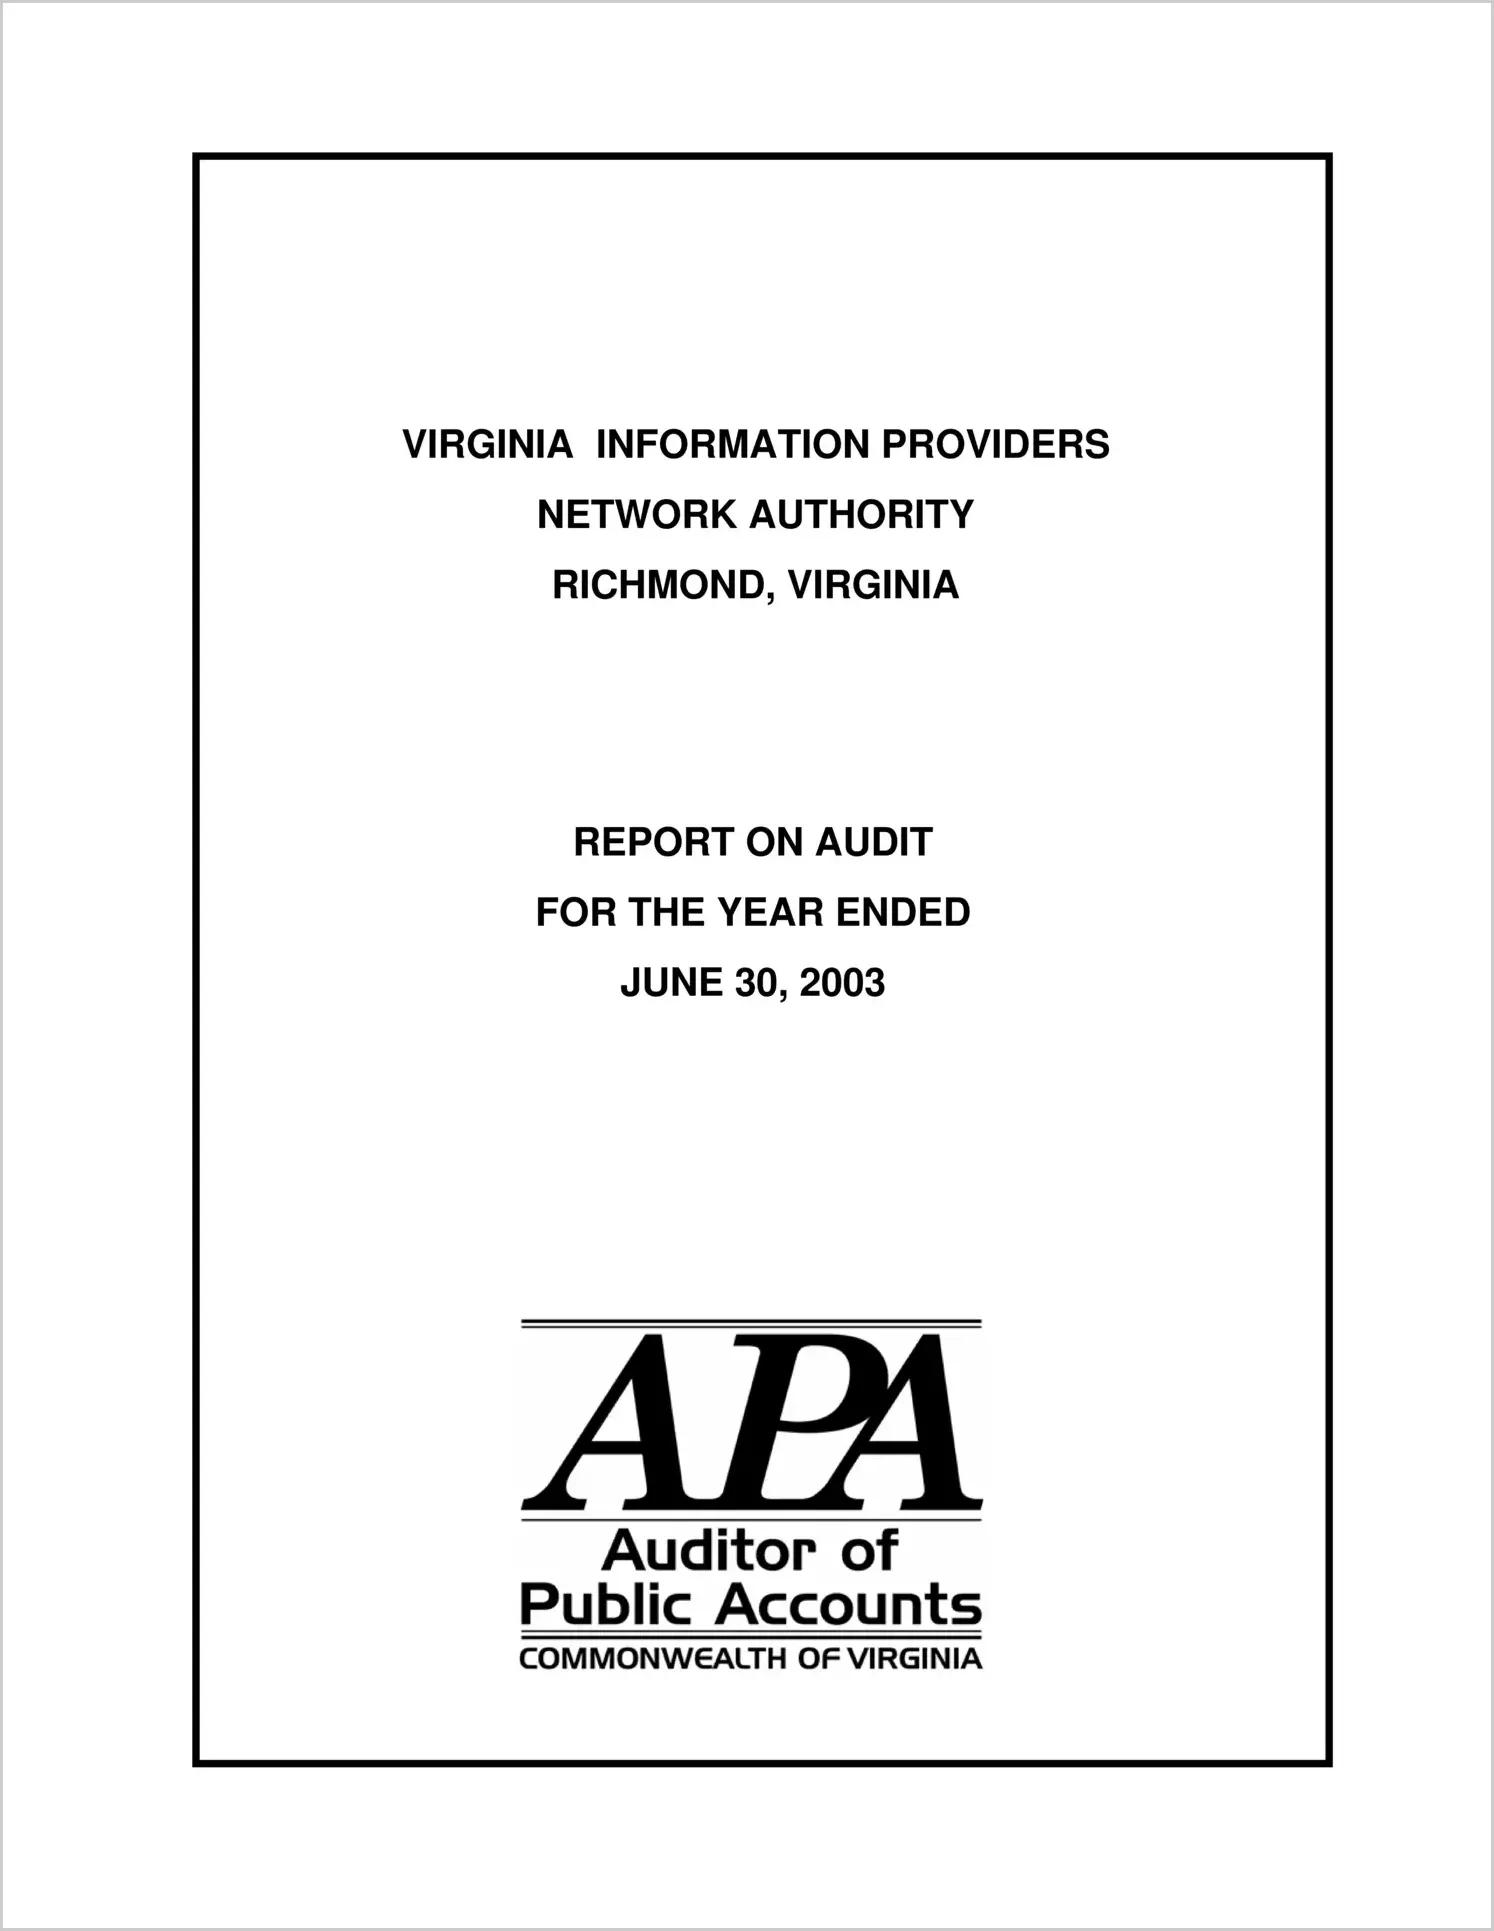 Virginia Information Providers Network Authority for the year ended June 30, 2003